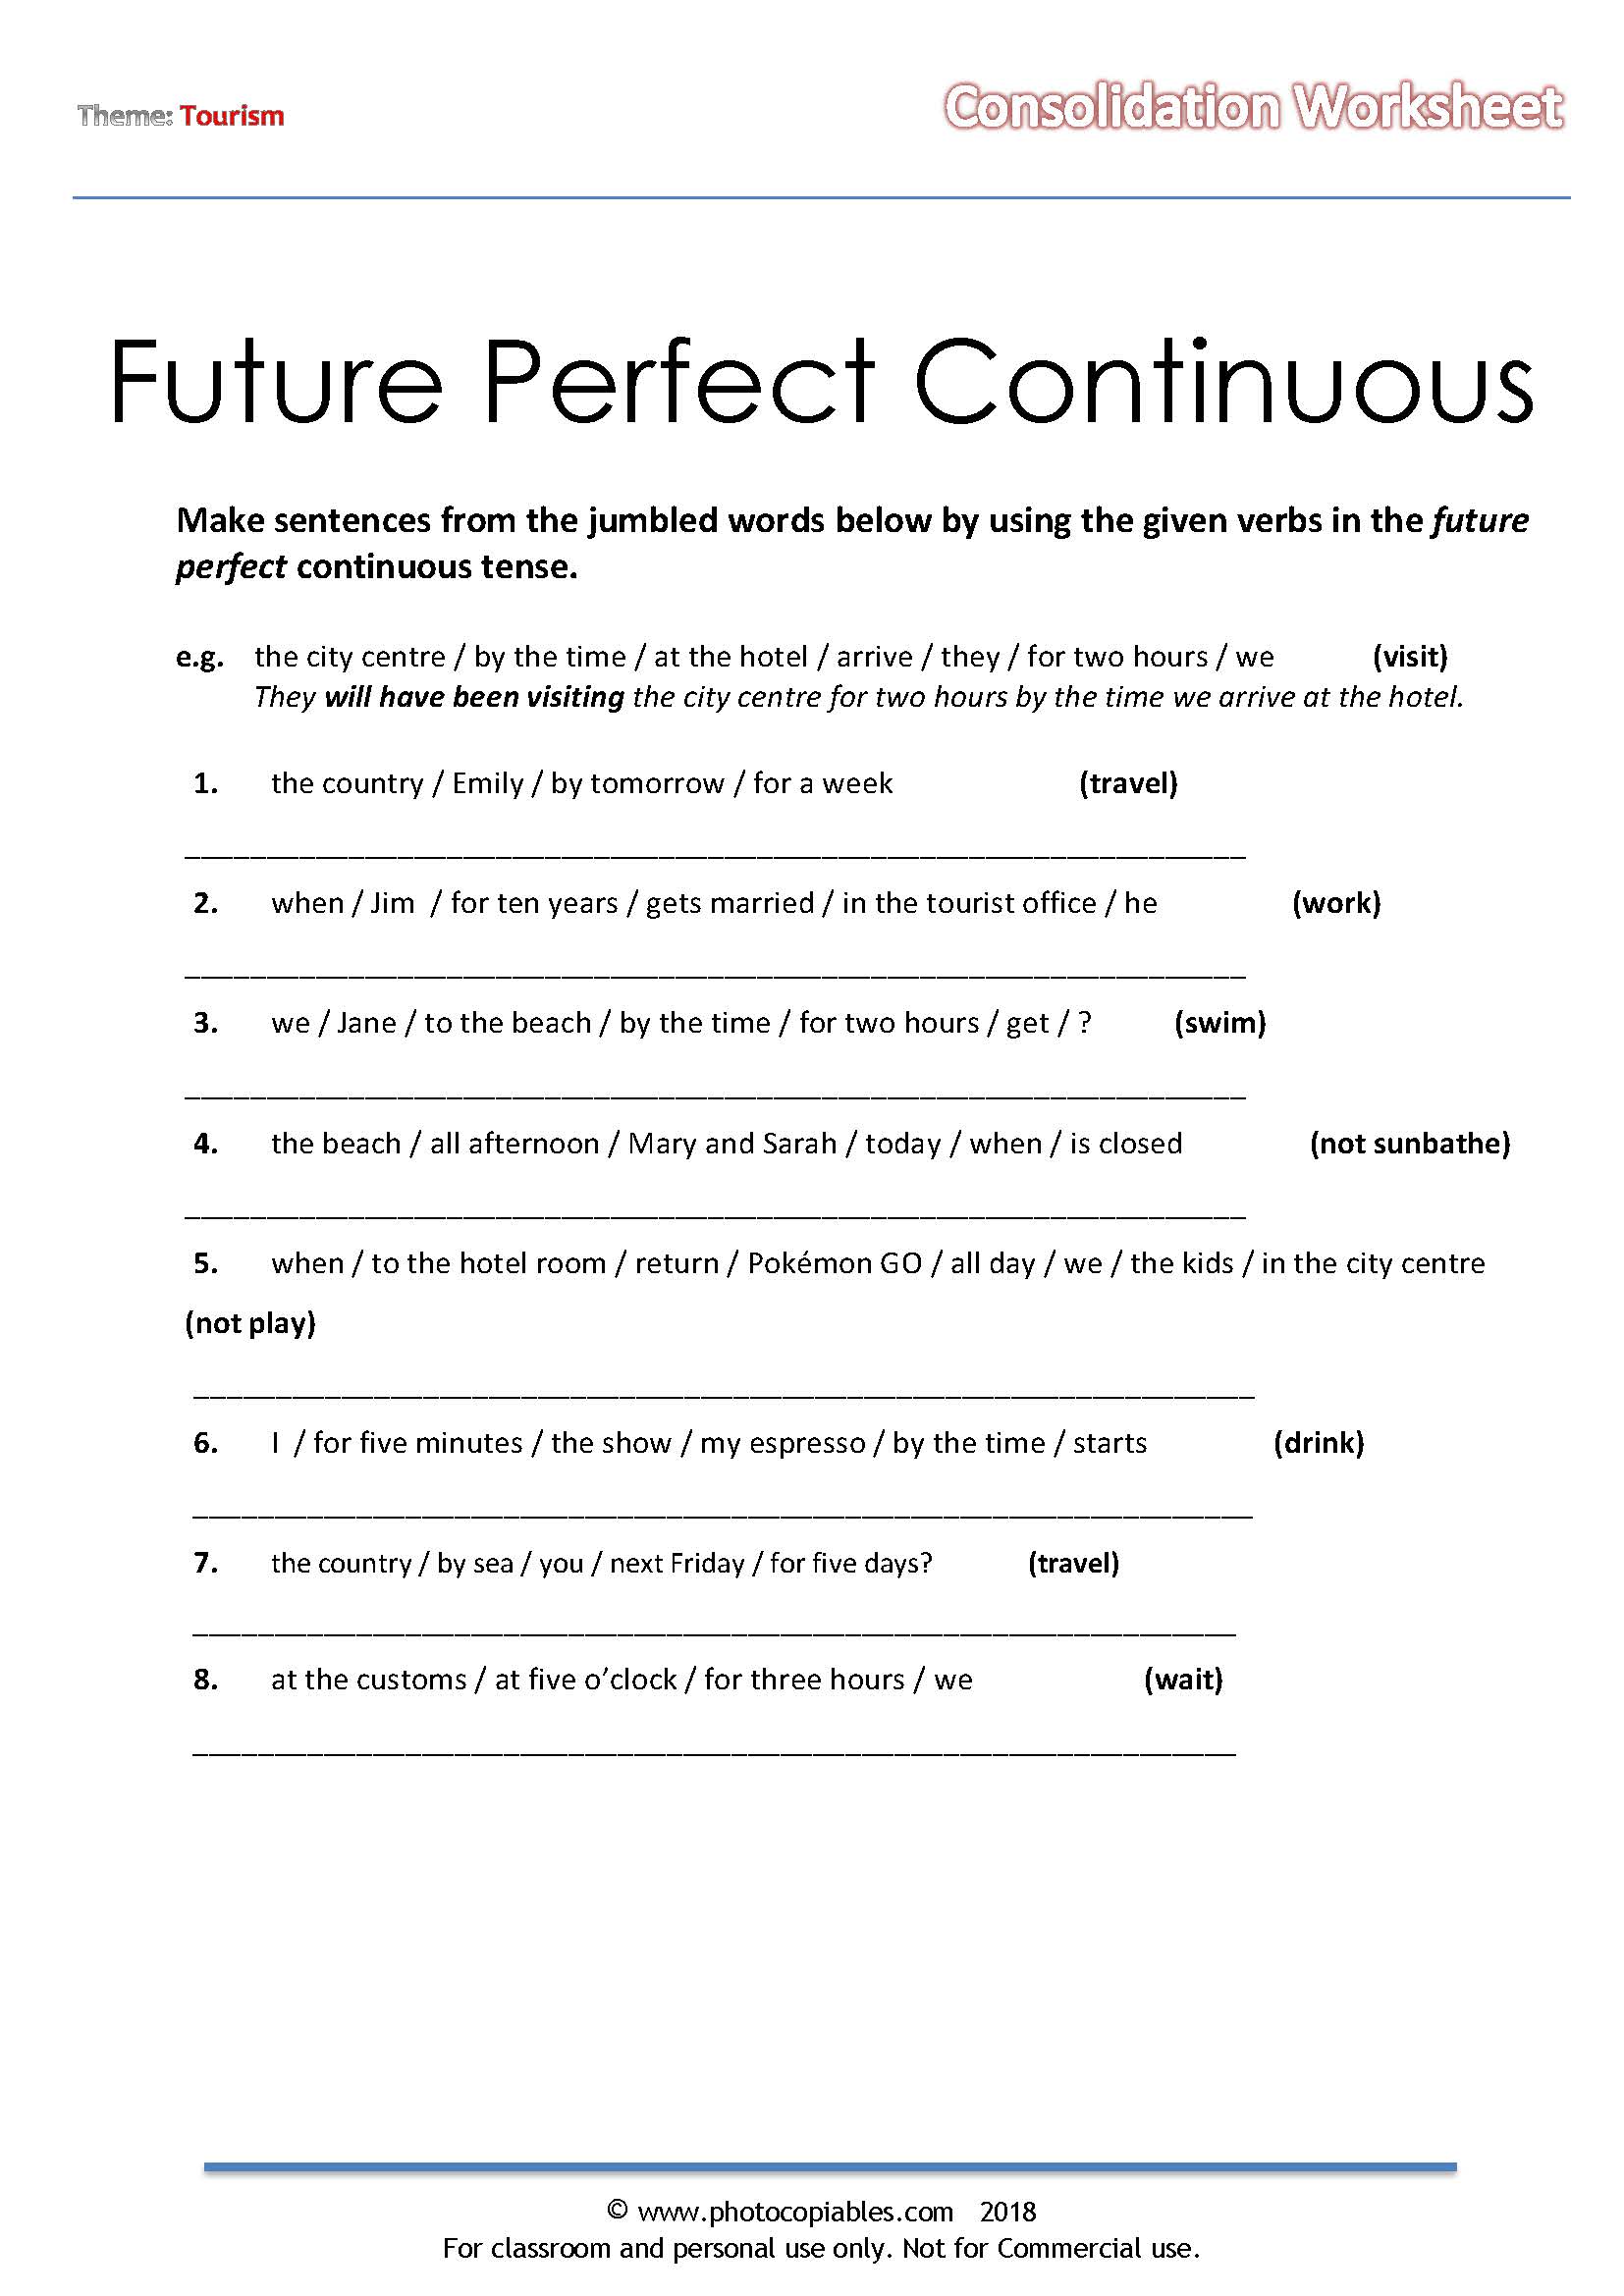 future-perfect-continuous-worksheet-photocopiables